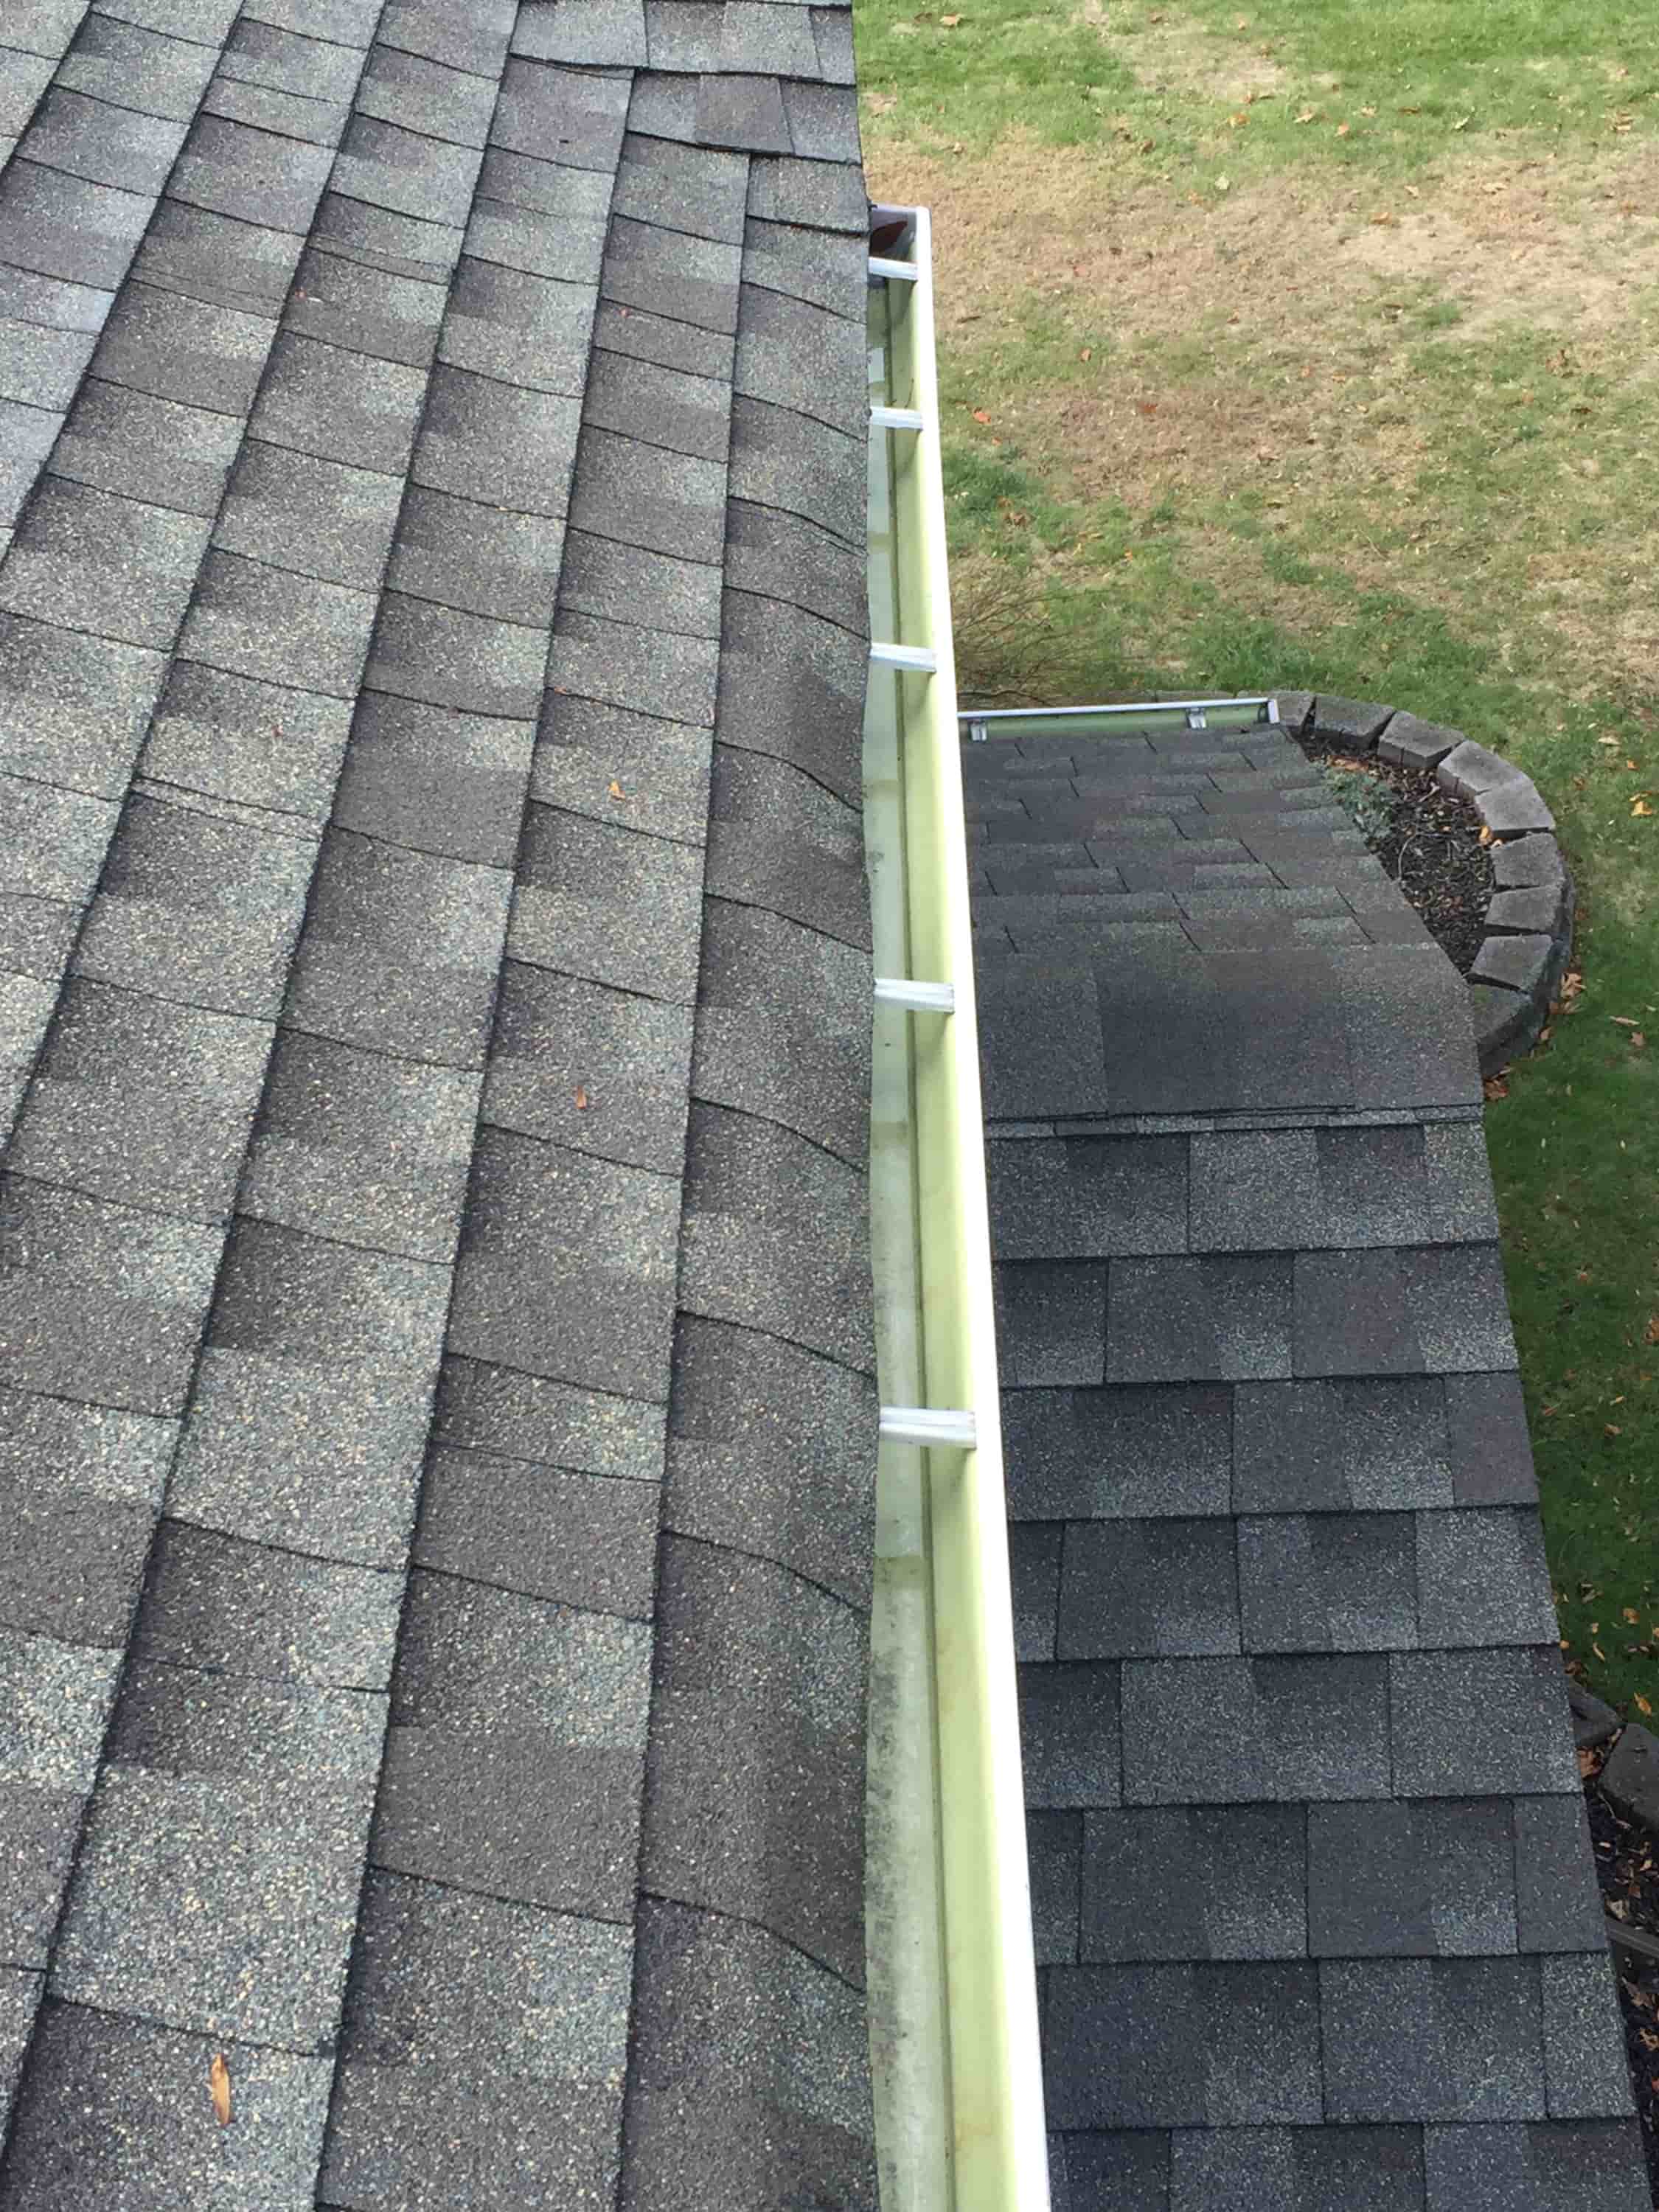 gutter cleaning service near me